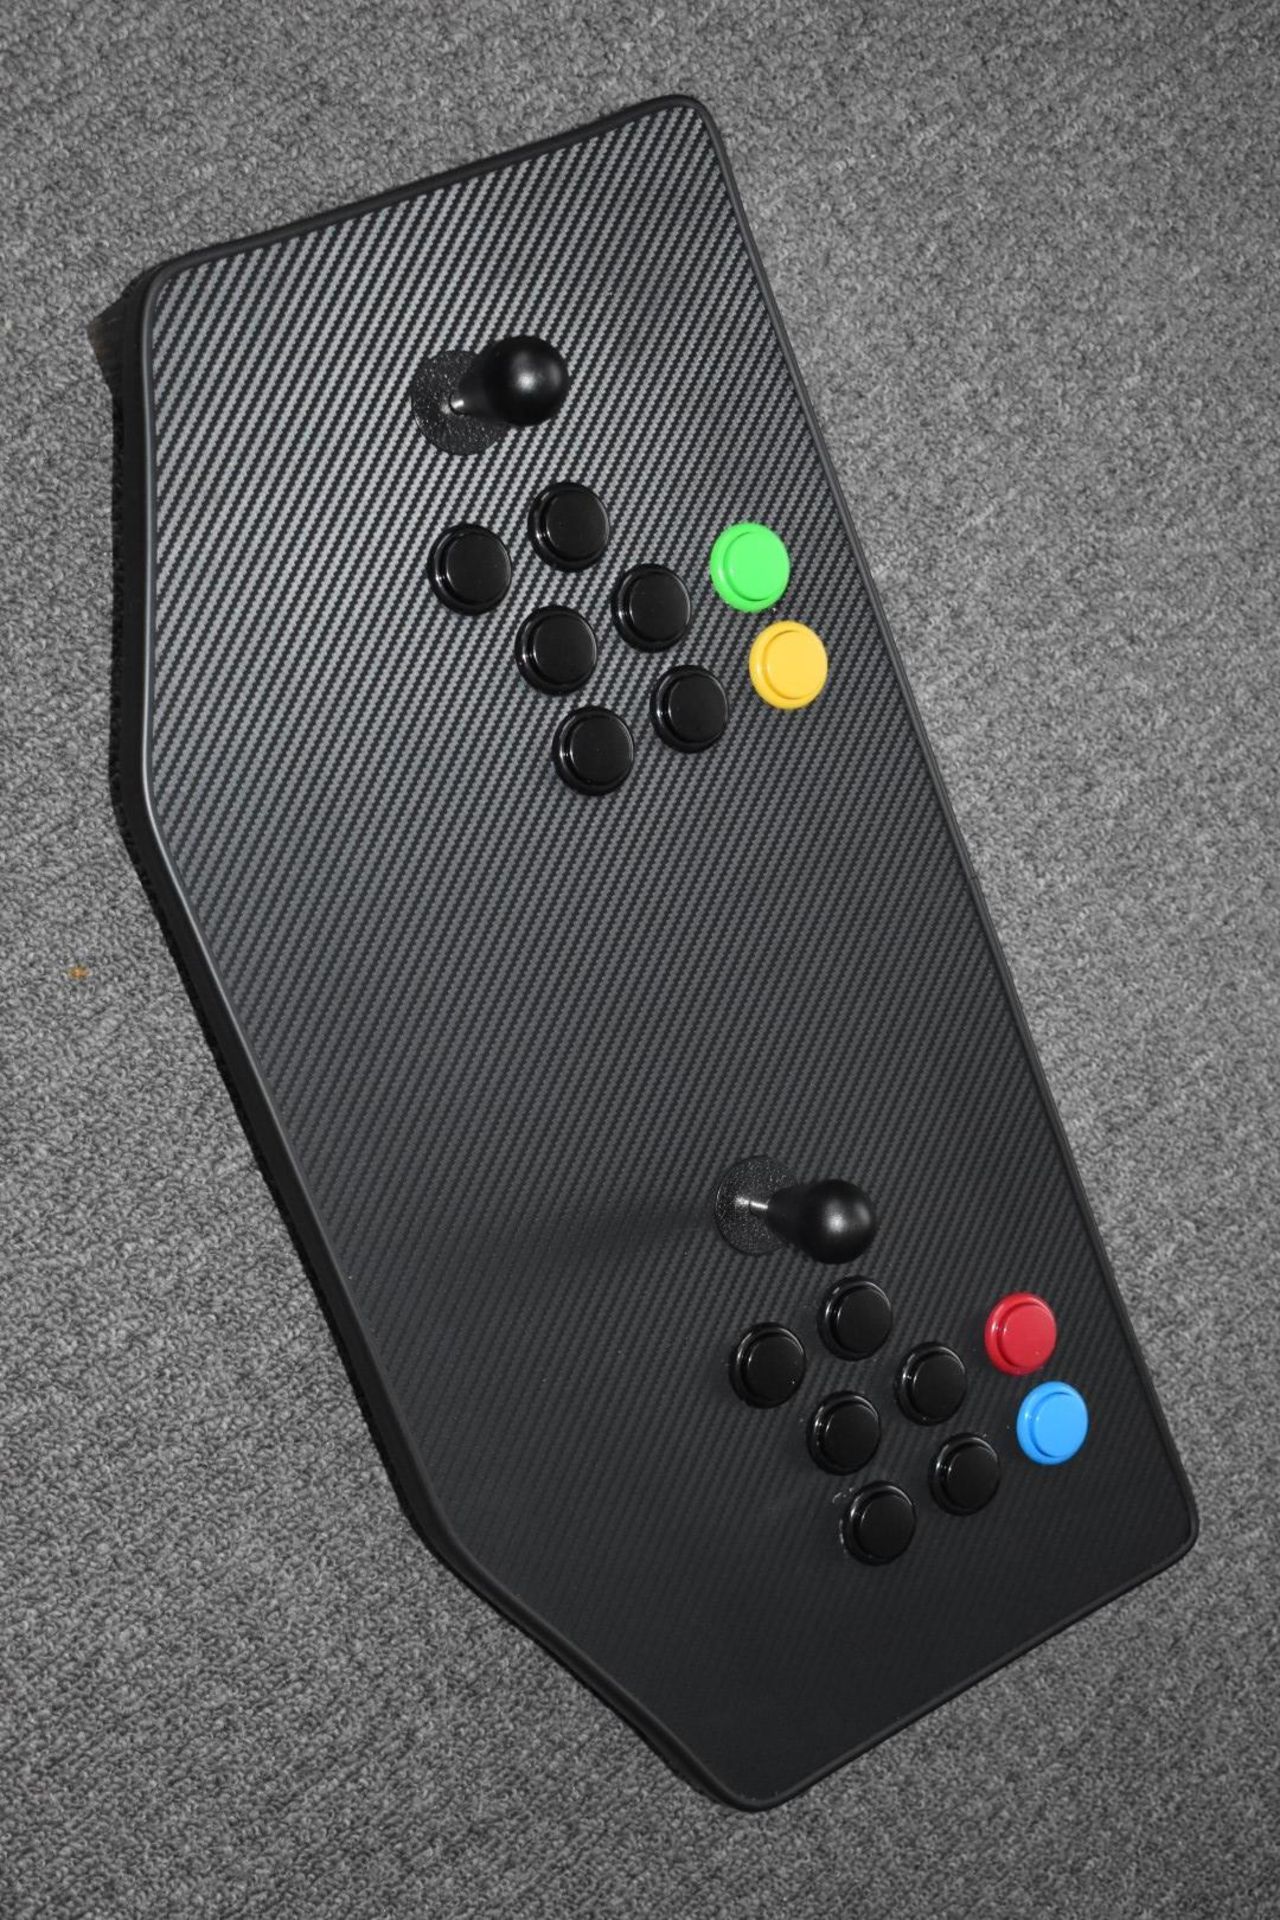 1 x Custom Two Player Arcade Control Stick - Pandoras Box With Games - NO VAT ON THE HAMMER! - Image 3 of 12